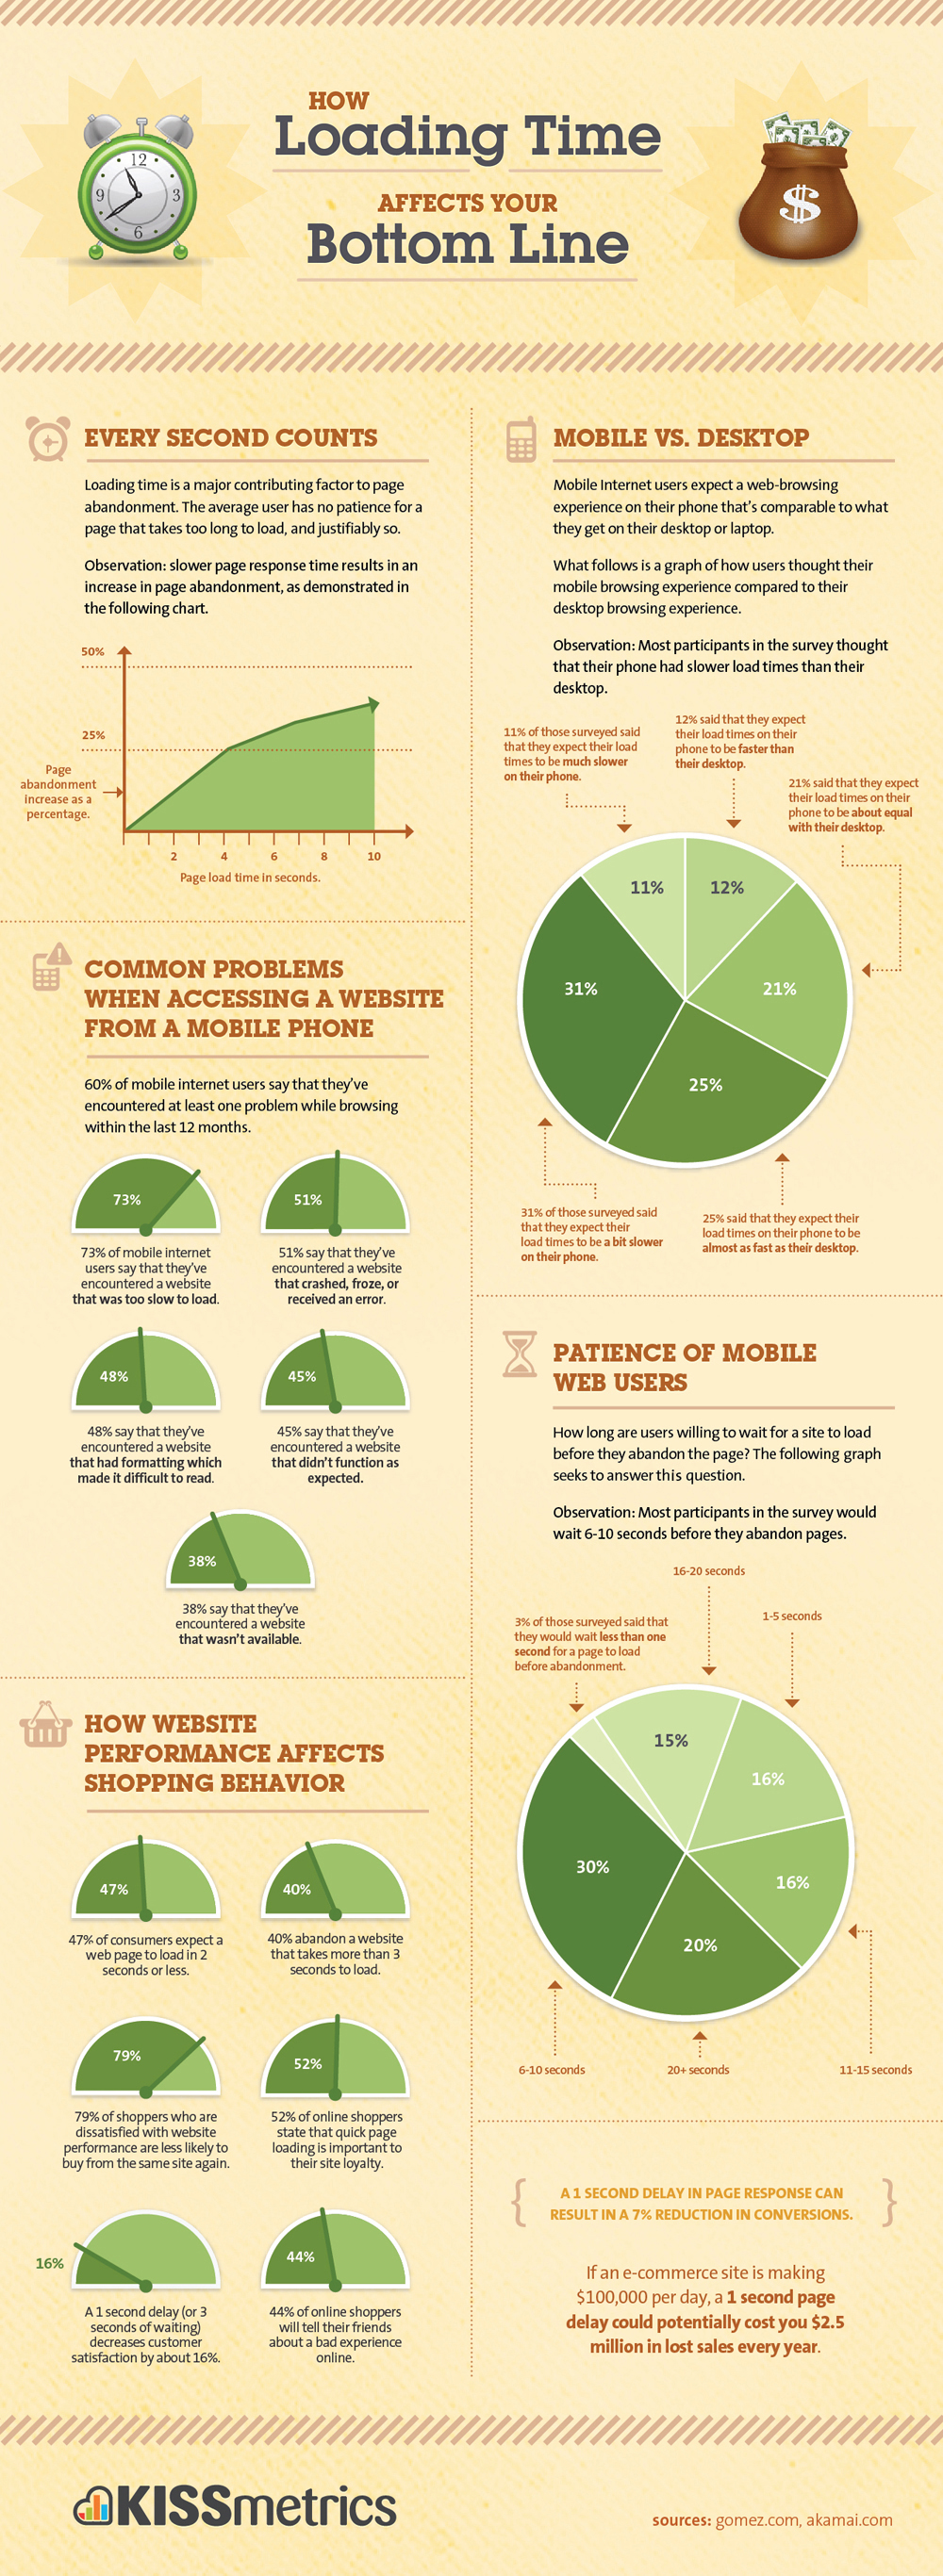 Kissmetrics infographic about how the loading time of your mobile responsive website affects your bottom line.